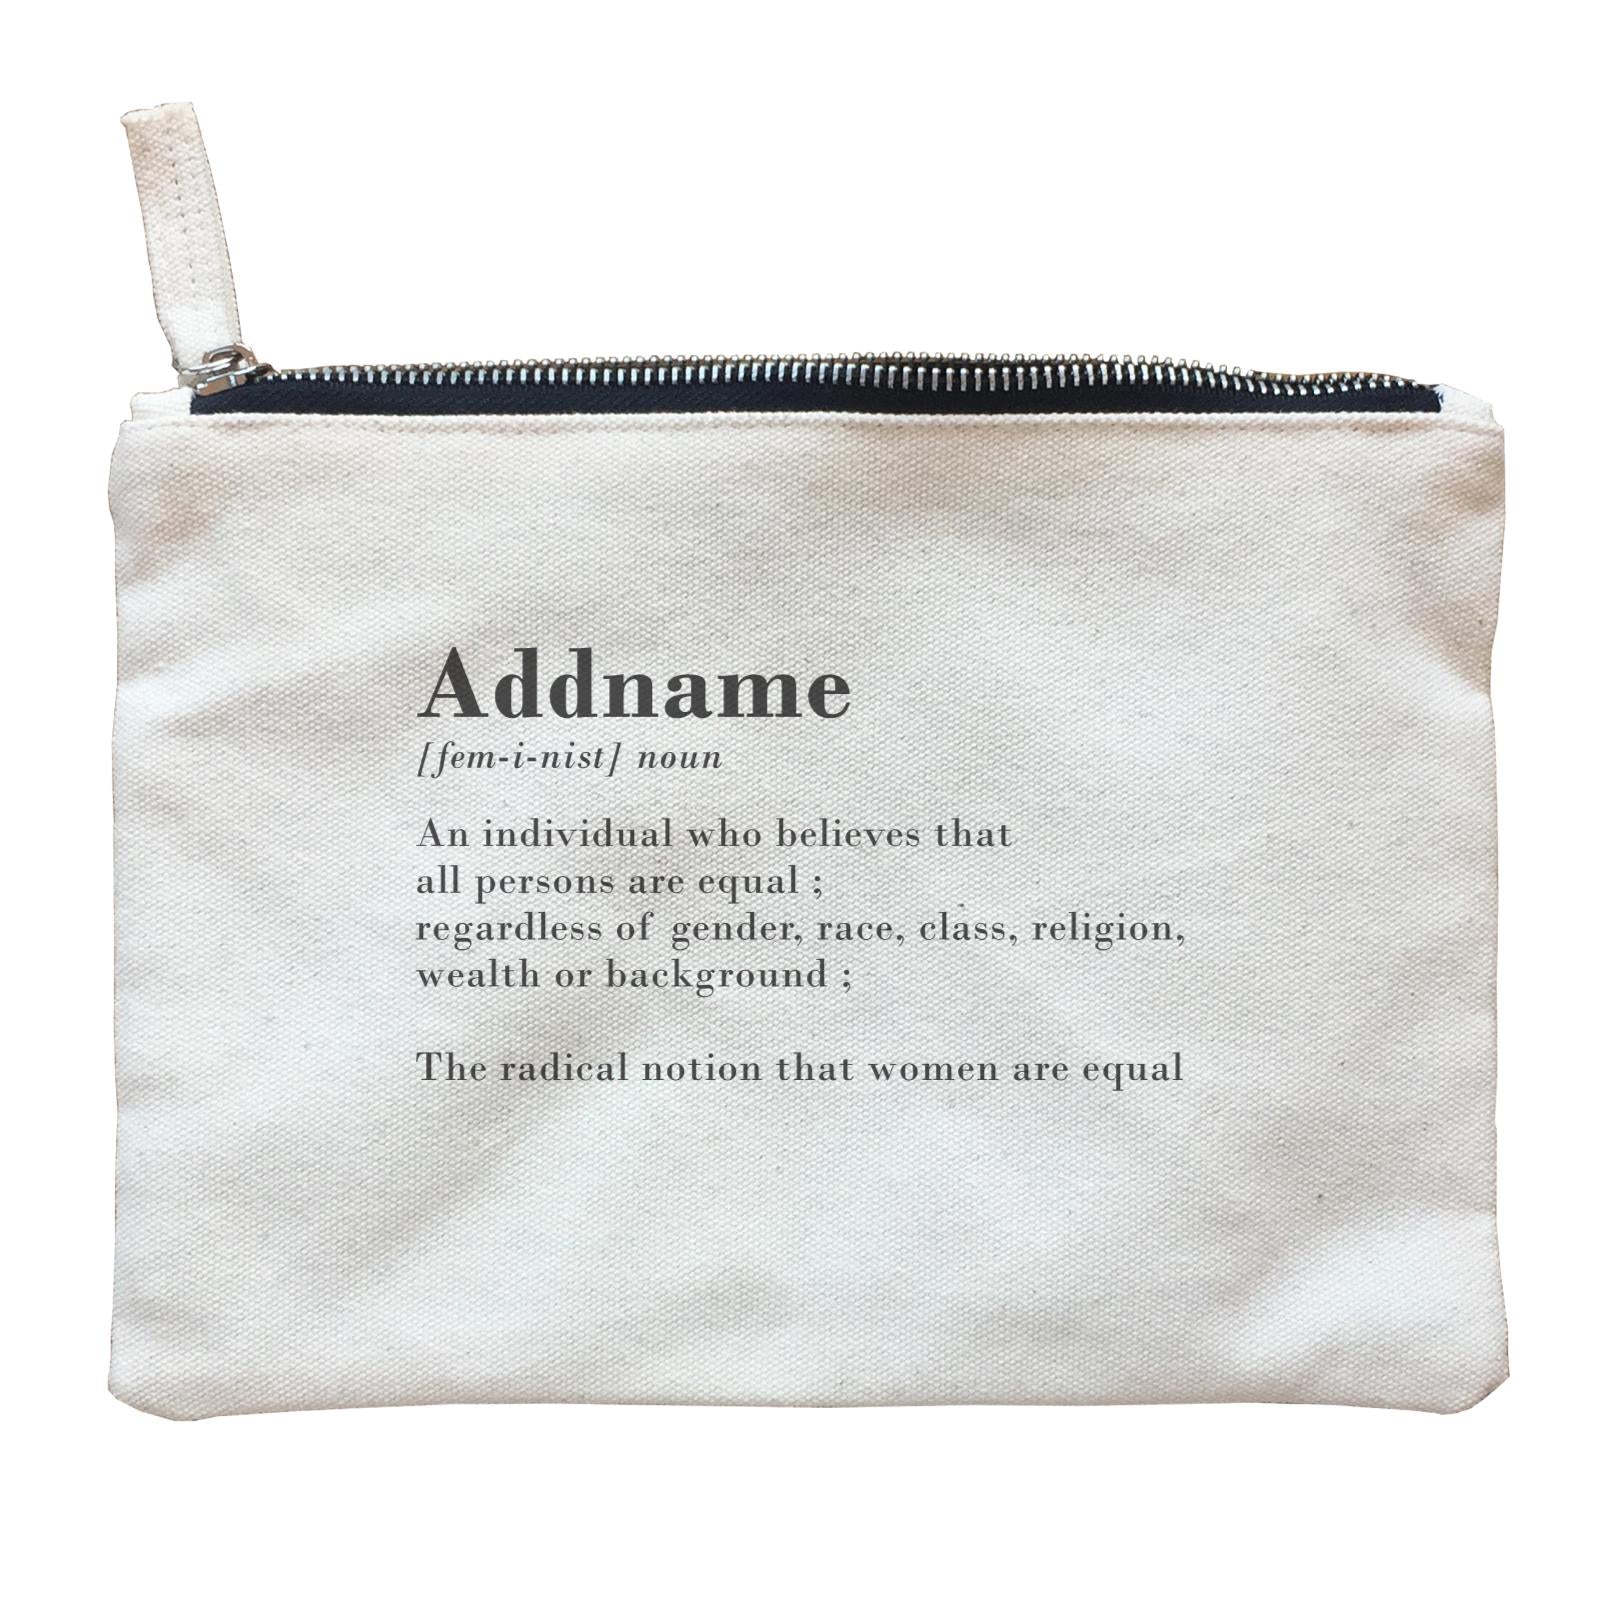 Best Friends Quotes Addname Feminist Noun Meaning Zipper Pouch